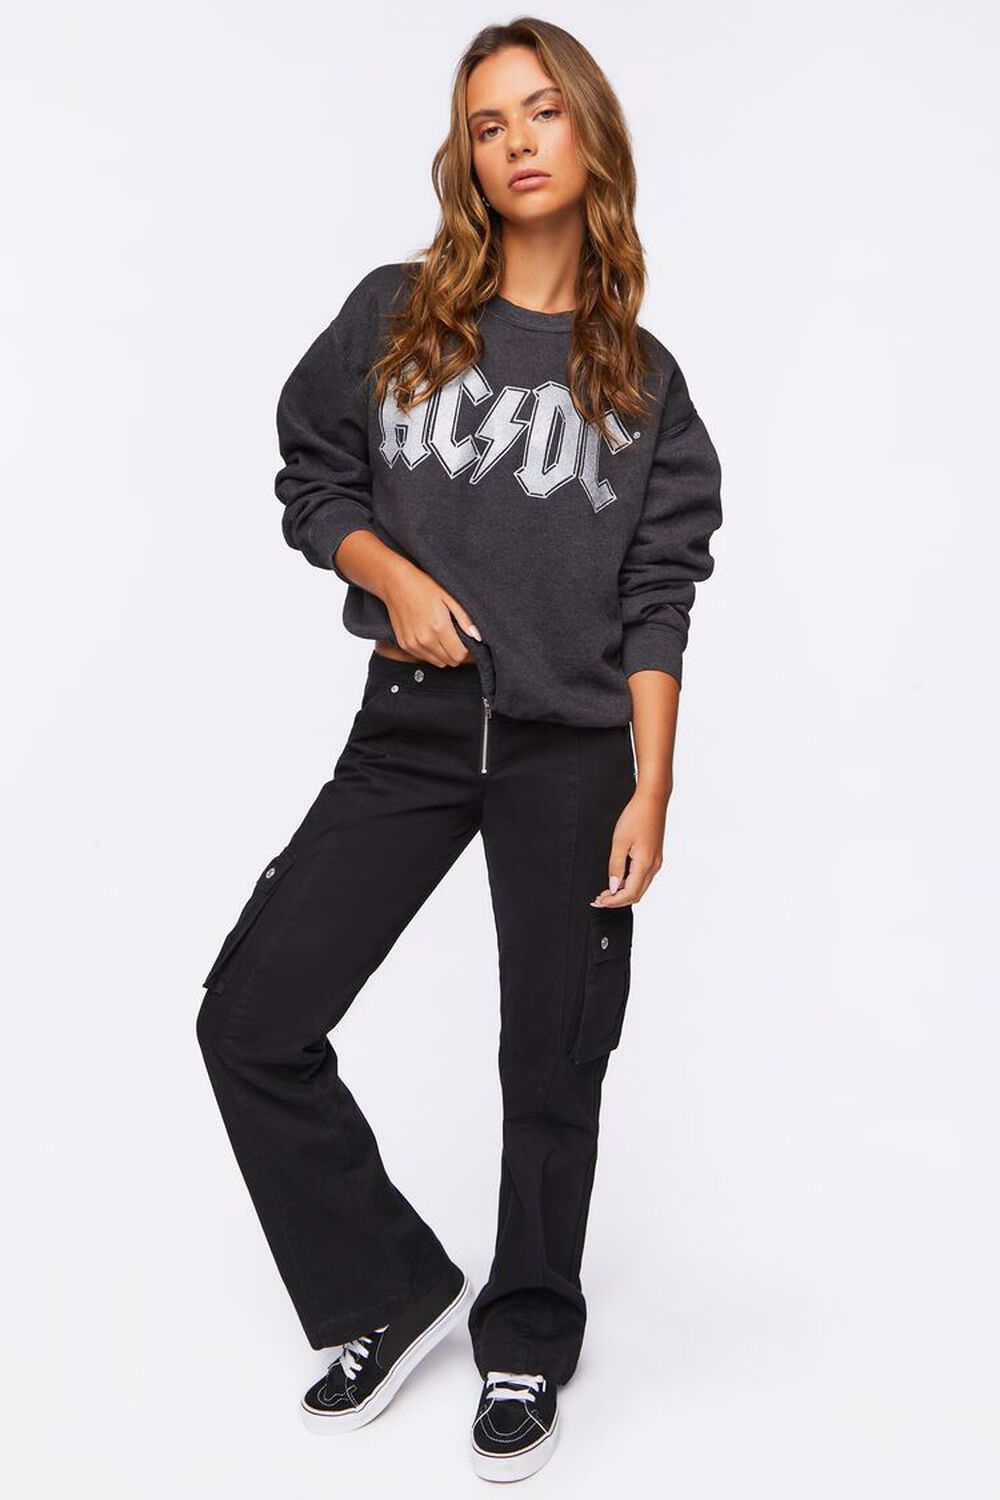 ACDC Tour Graphic Pullover